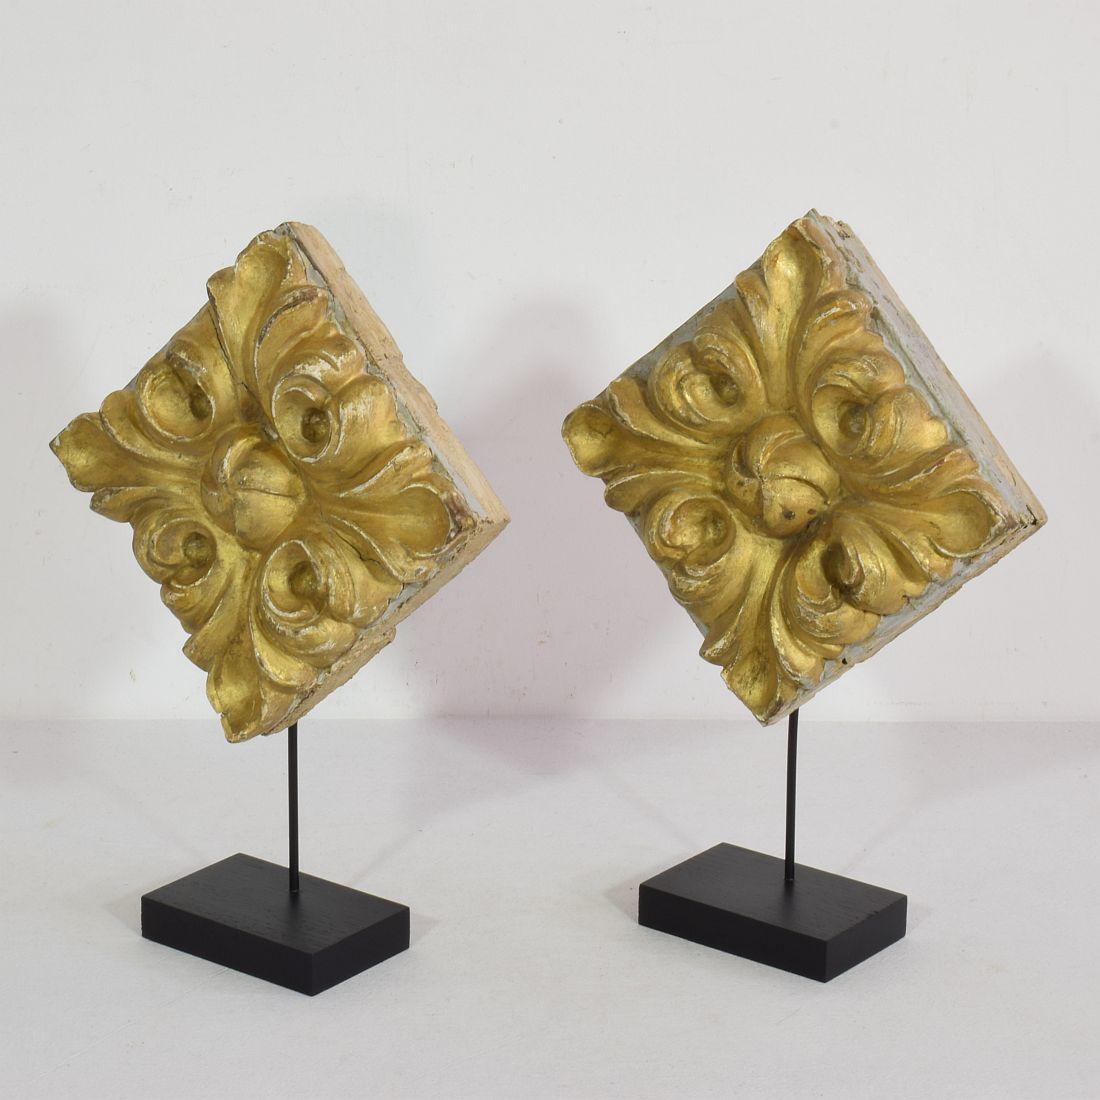 Beautiful pair 18th century neoclassical giltwood floral ornaments.
Portugal circa 1780.
Weathered

Measurements are individual and include the wooden base.